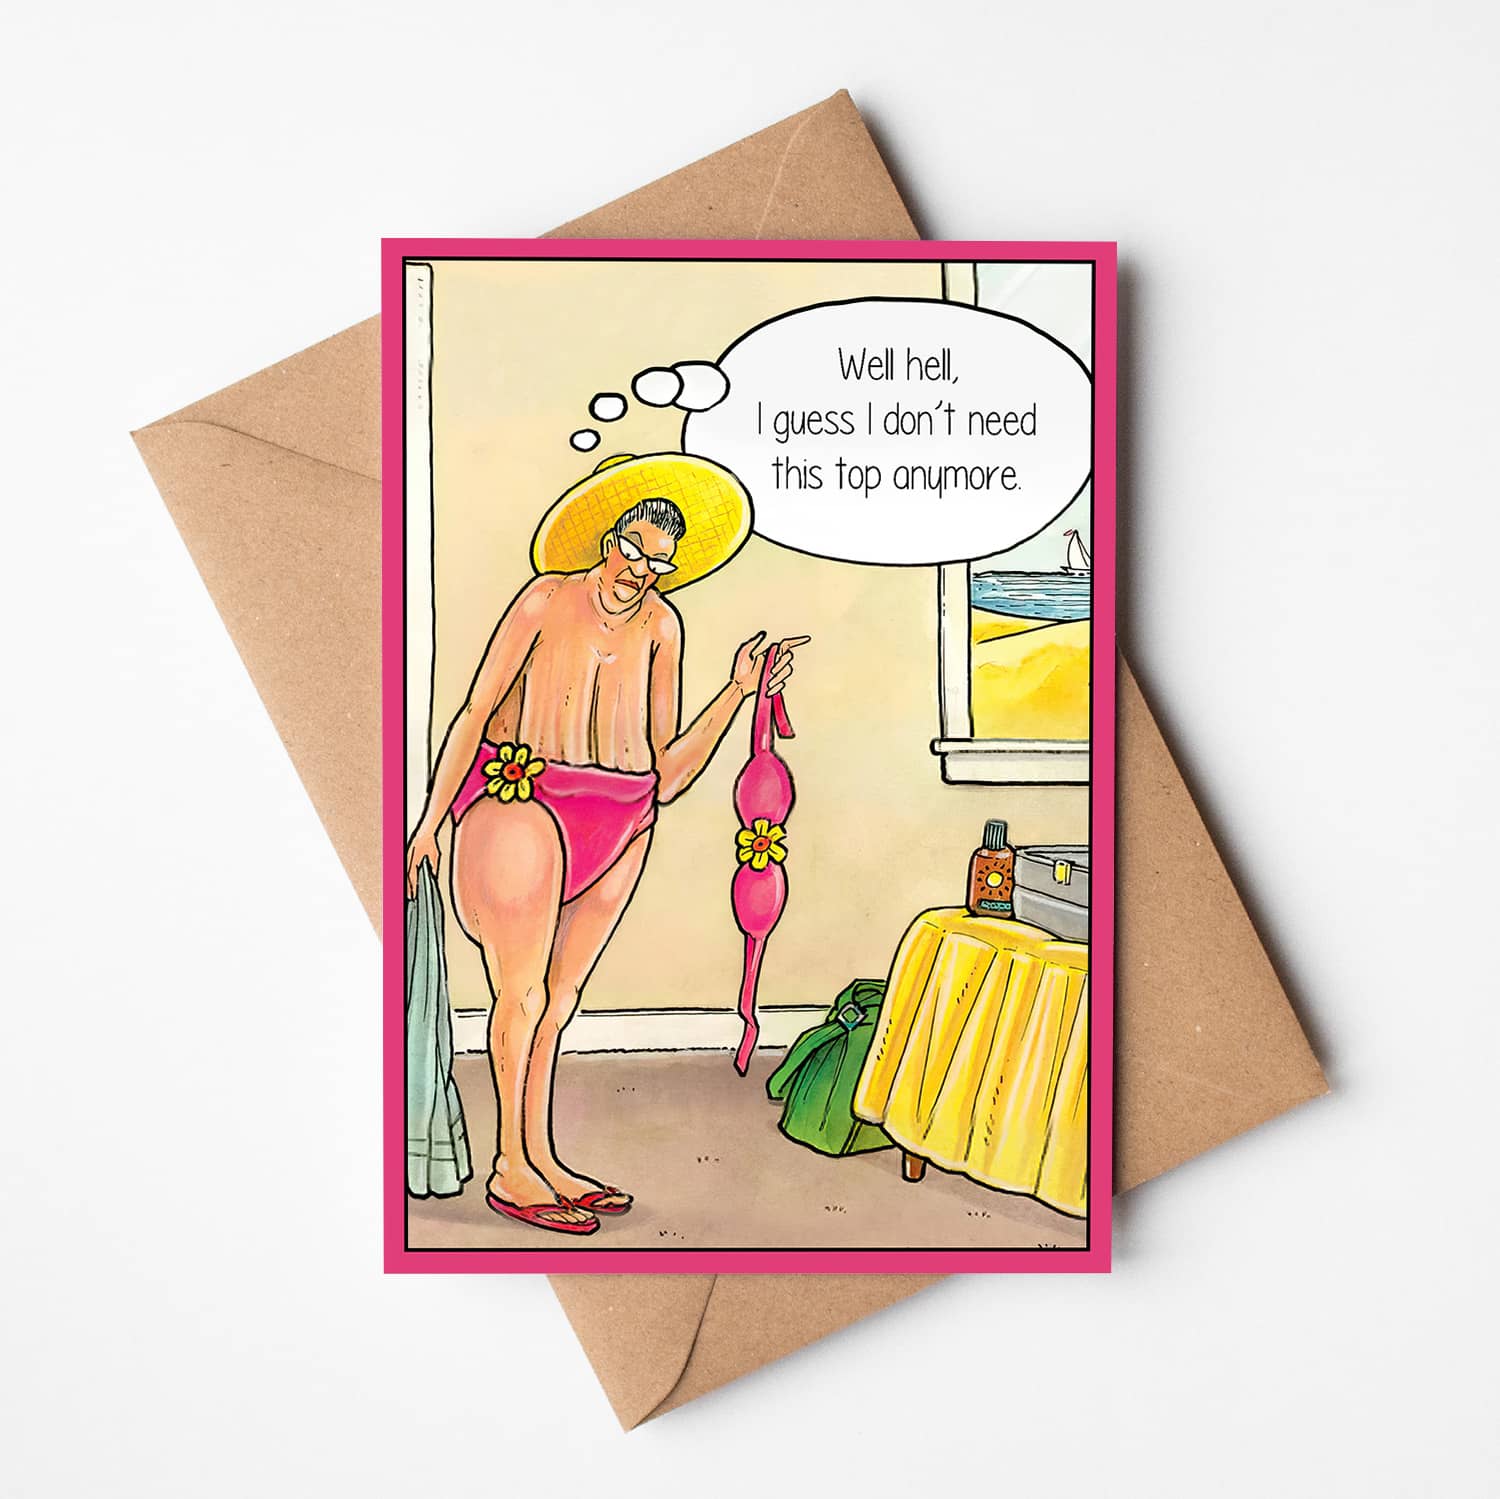 Well Hell, No Bra Needed Funny Birthday Card, Printing in County Monaghan, Ireland by Design Gaff